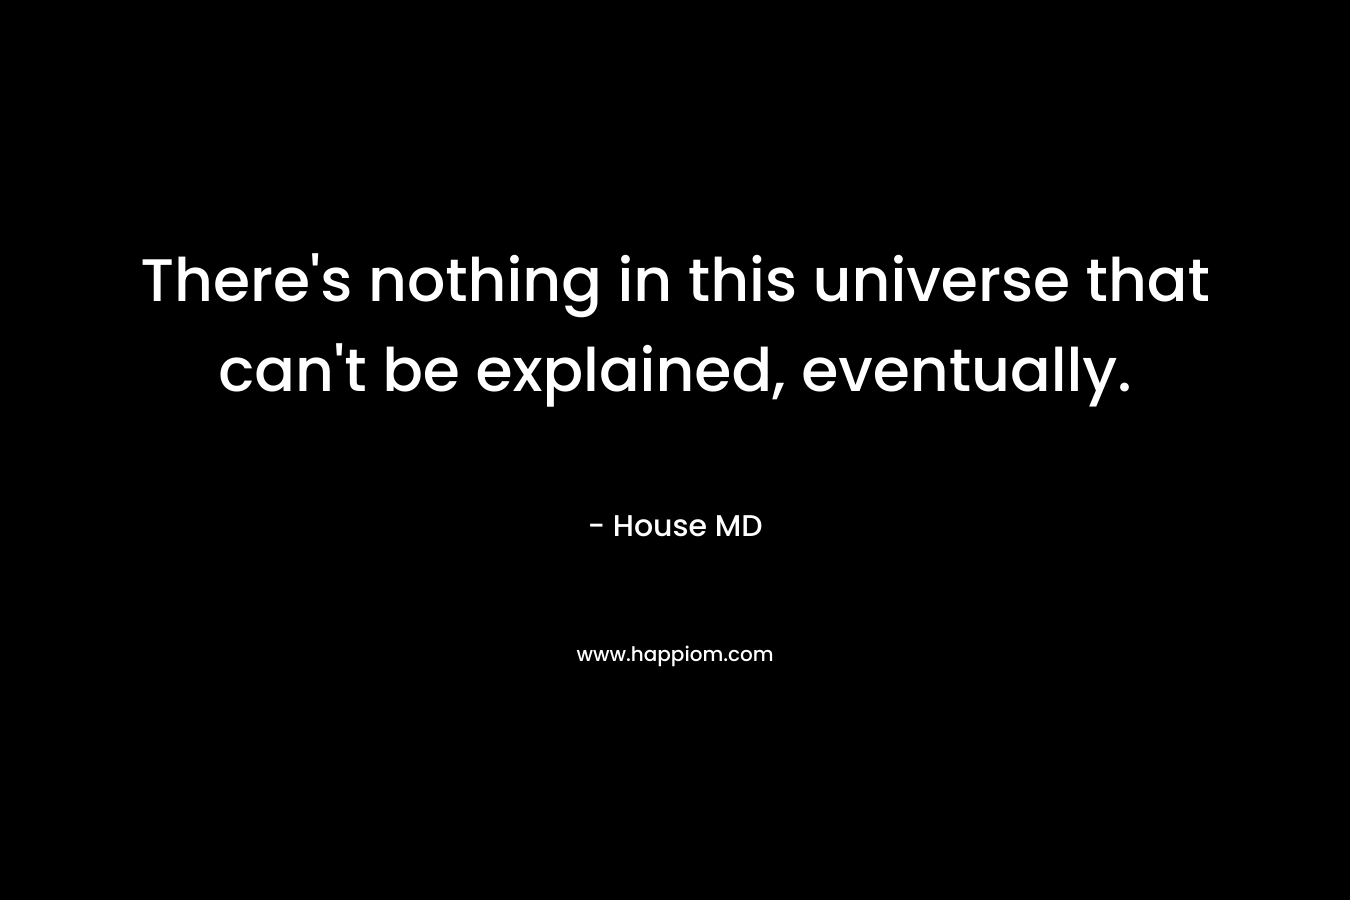 There’s nothing in this universe that can’t be explained, eventually. – House MD